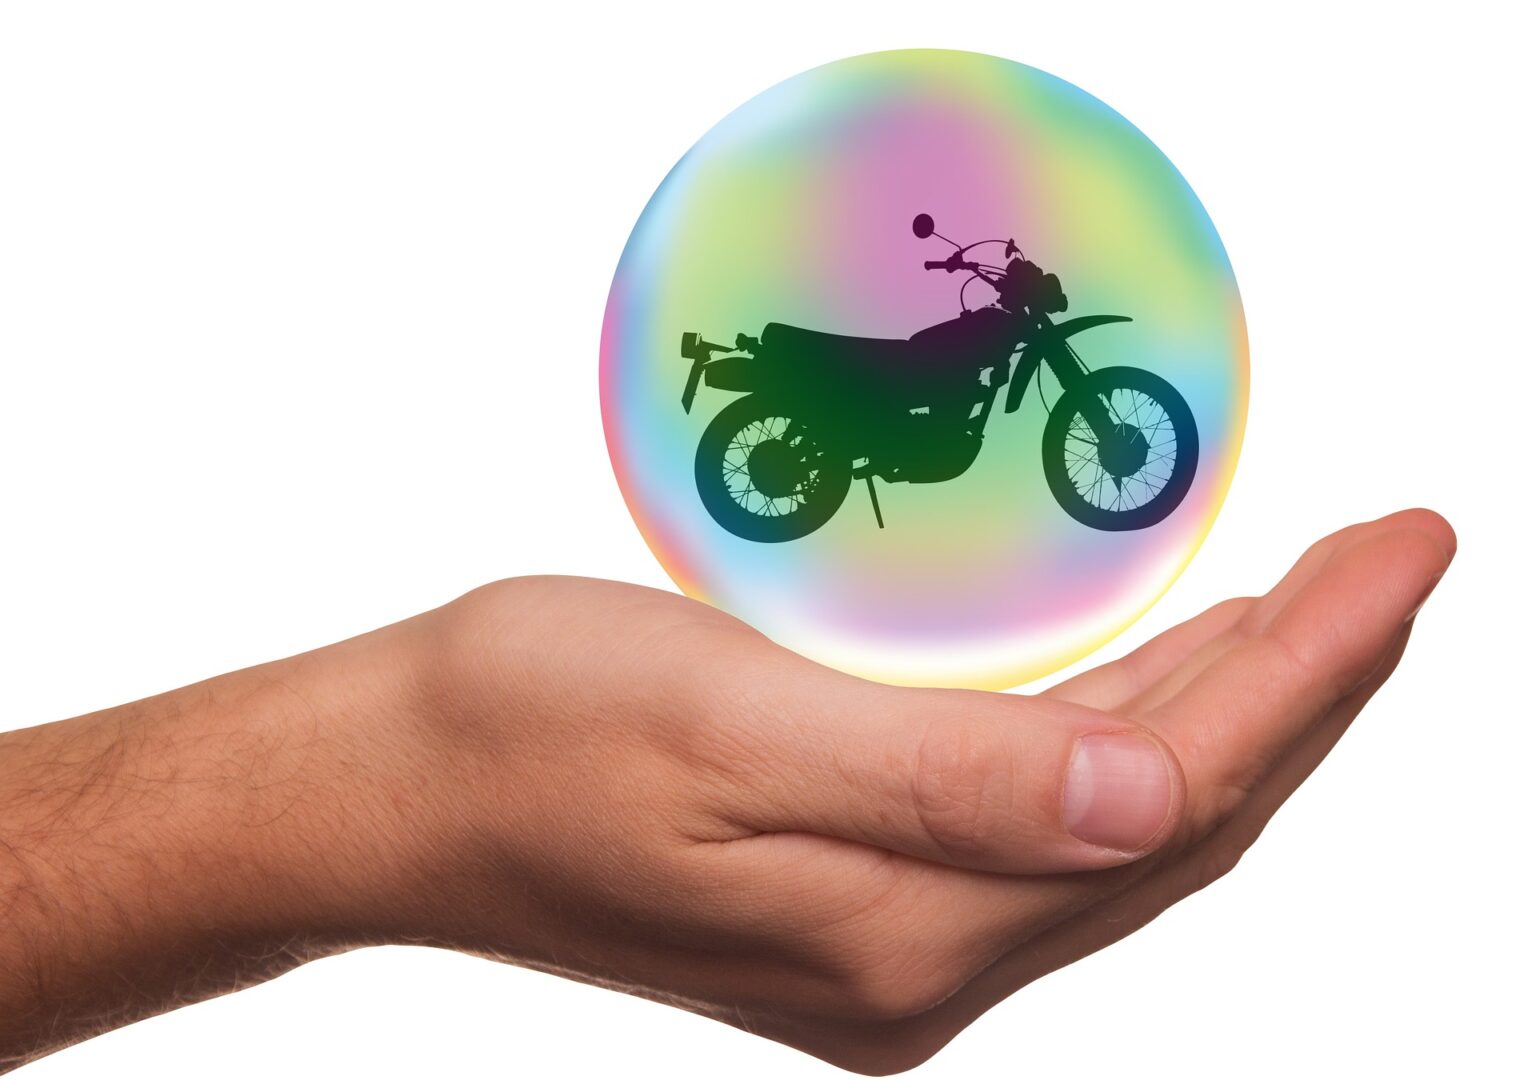 Hand holding bubble which is having image of a Bike inside of it